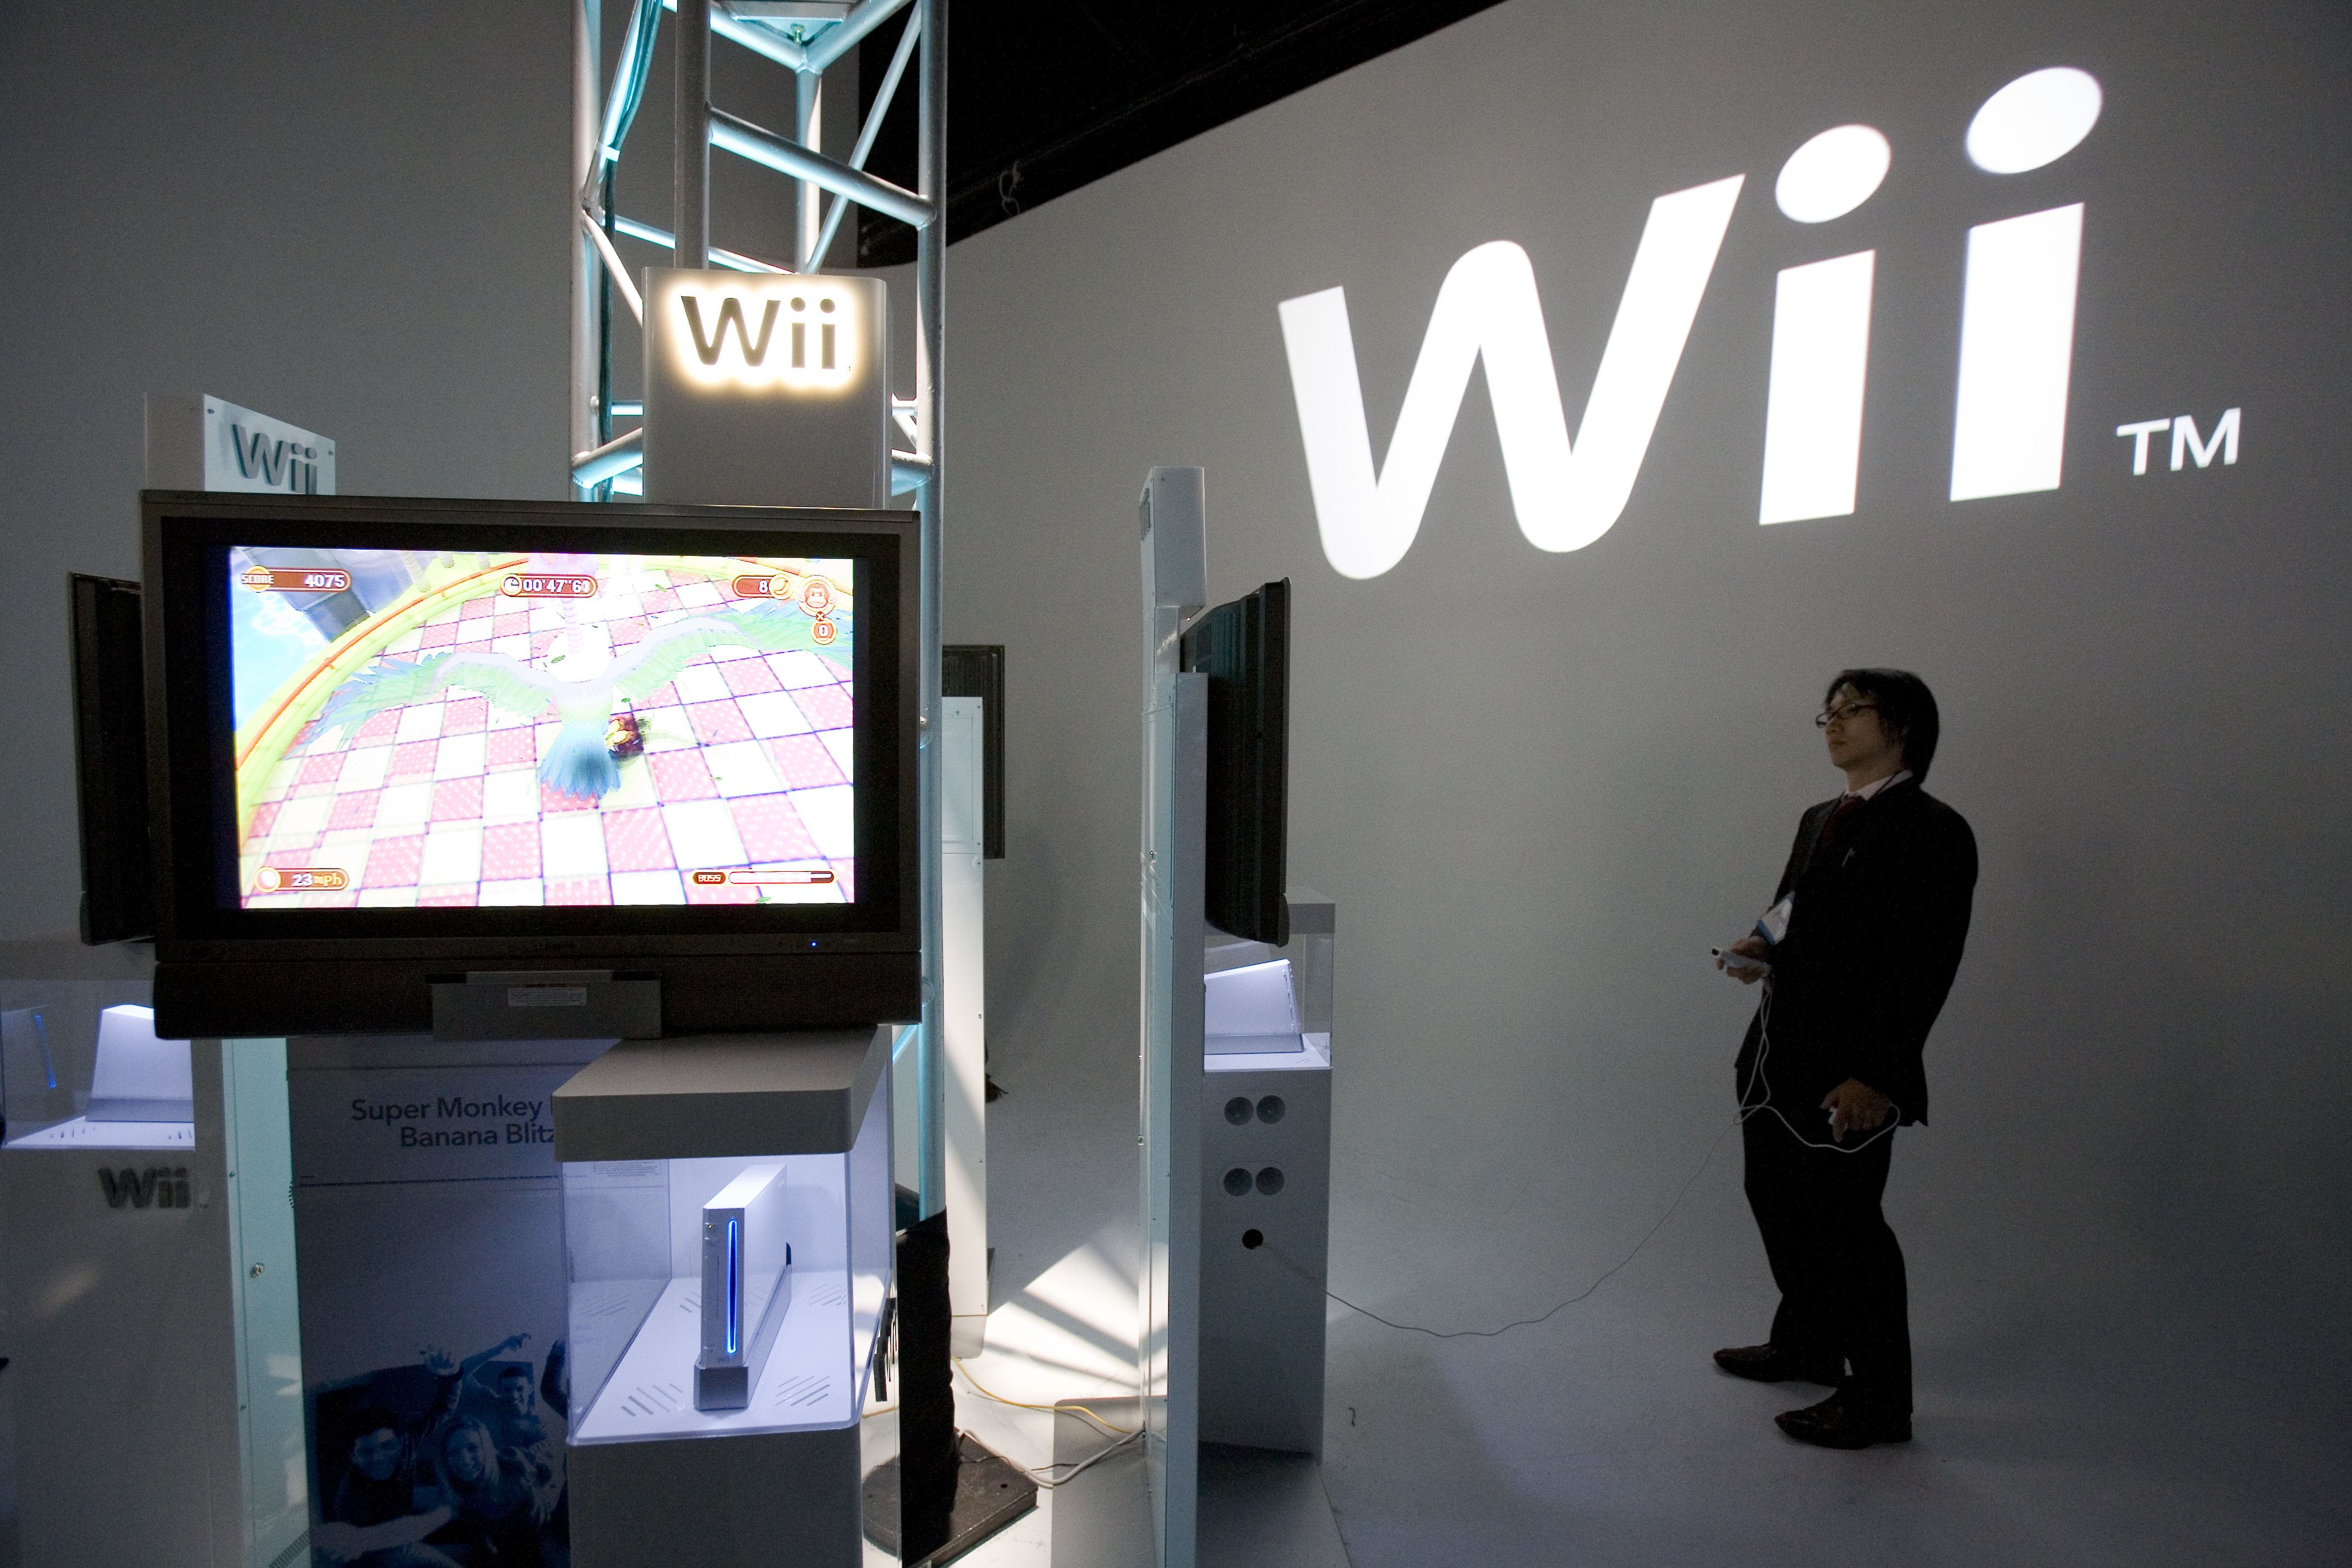 The Nintendo Wii and DSi stores have been down for days with no explanation